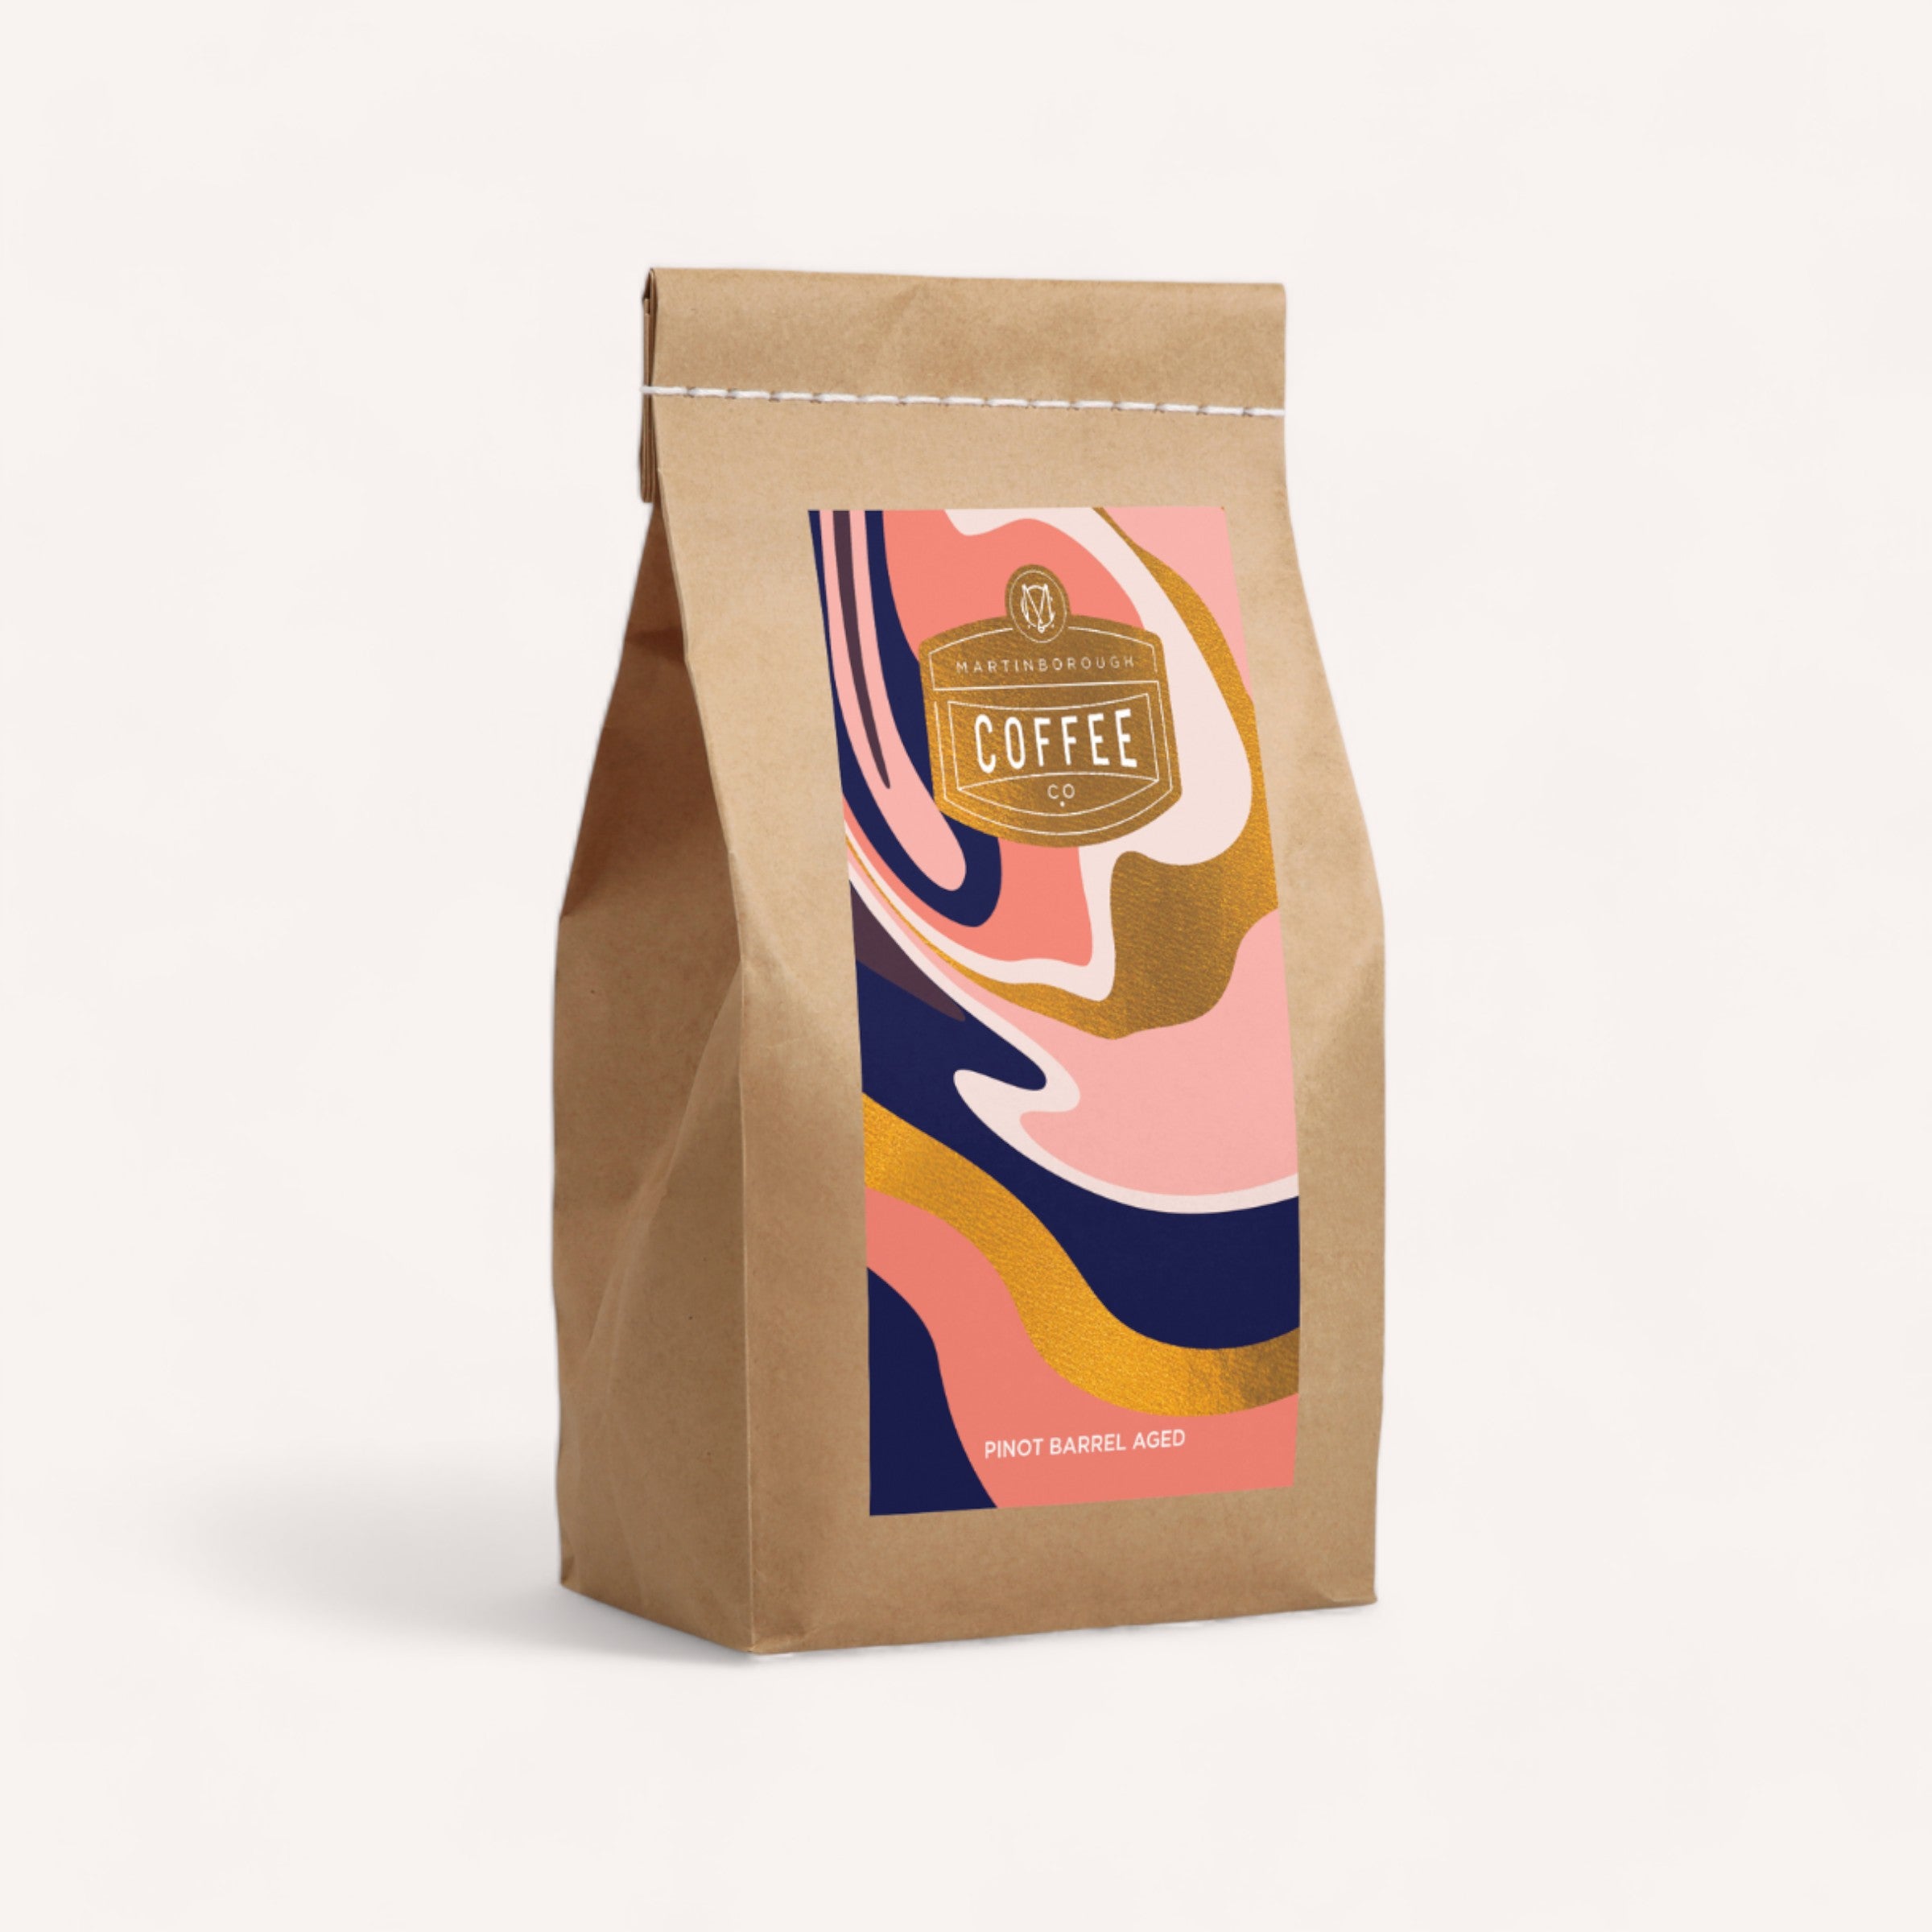 A Pinot Barrel Aged Coffee craft paper bag with a modern design label featuring abstract shapes and vibrant colors, filled with arabica beans from Martinborough Coffee Company.